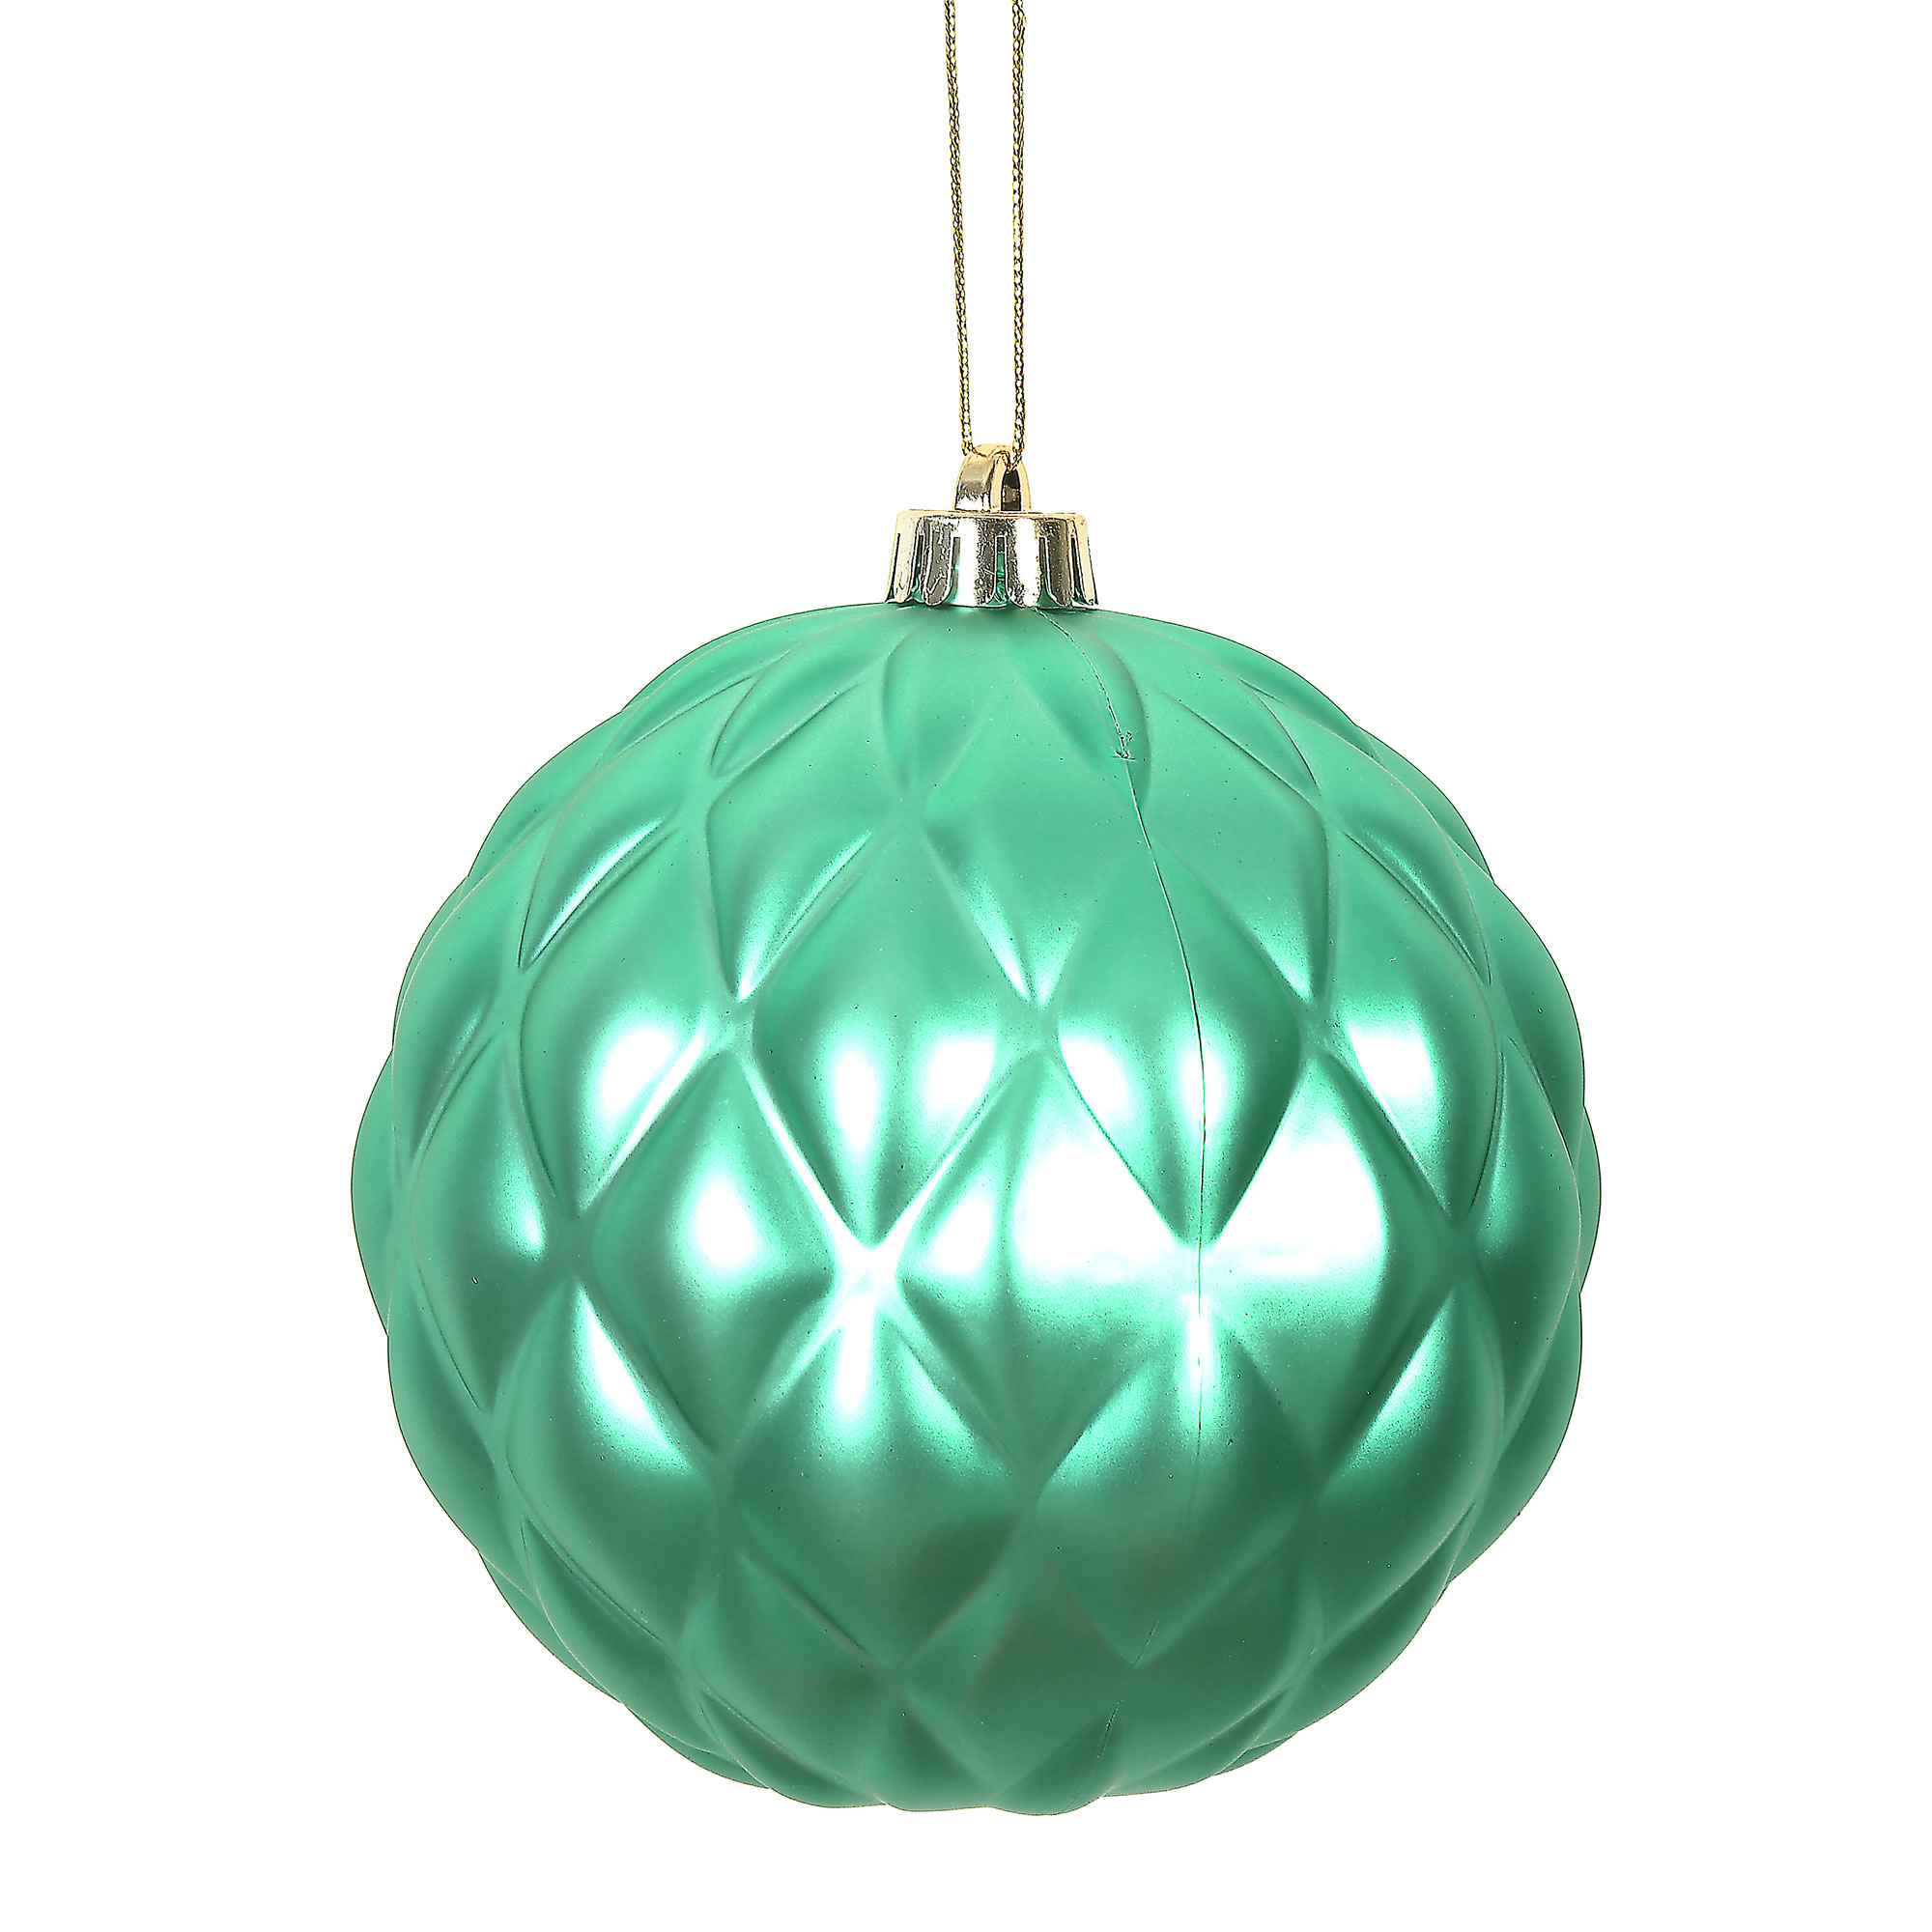 Vickerman 6" Seafoam Matte Round Pine Cone Ornament, with drilled and wired caps. Comes 4 per Bag. - image 1 of 2